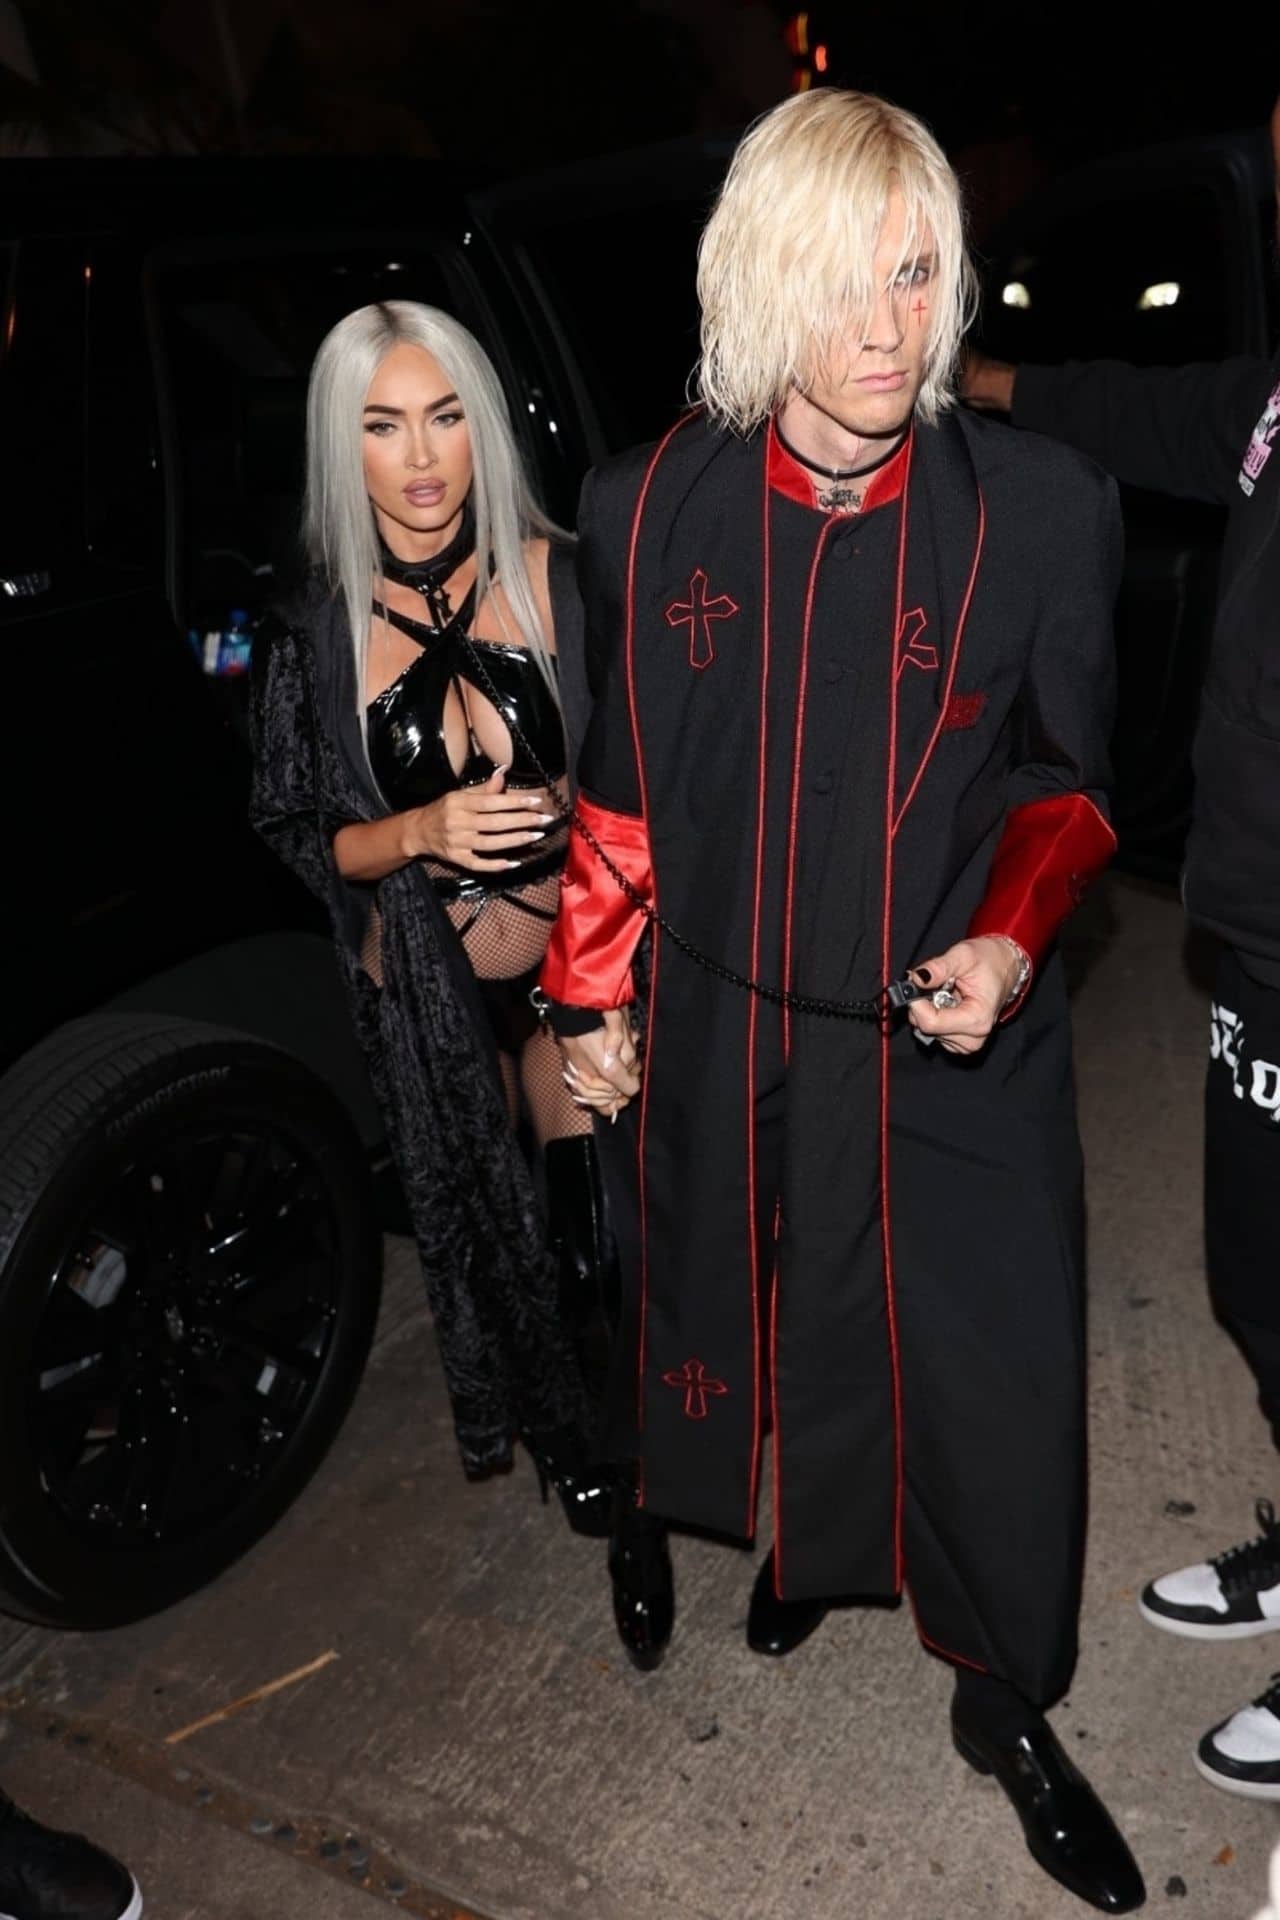 Megan Fox Gave a Spectacular Show at the 2022 Vas Morgan's Halloween Party in West Hollywood